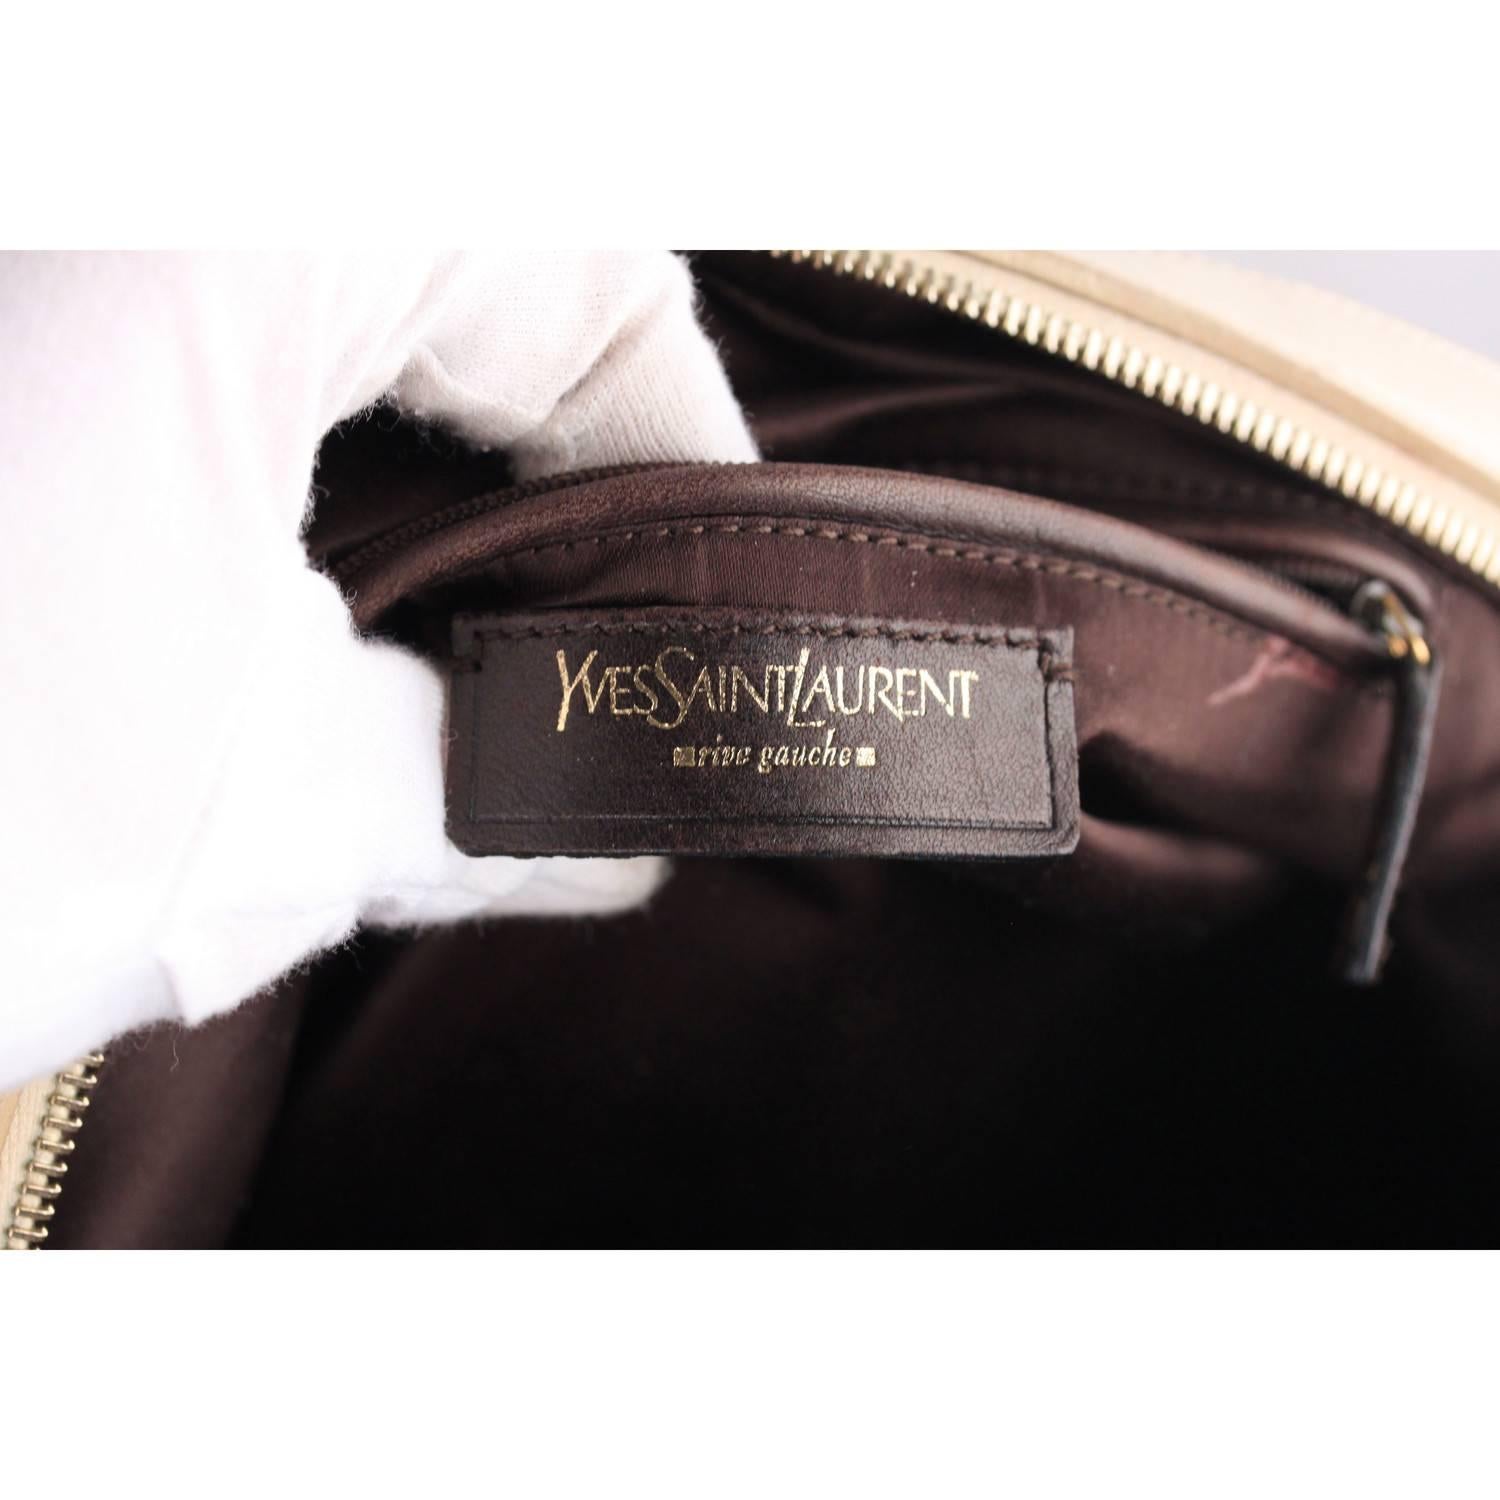 This bag will come with a CERTIFICATE of AUTHENTICITY provided by Entrupy, leading International Fashion Authenticators.

- YVES SAINT LAURENT iconic 'Muse bag' in white leather 
- Woven detailing
- Roomy interior 
- Whip stitching
- Gold-tone